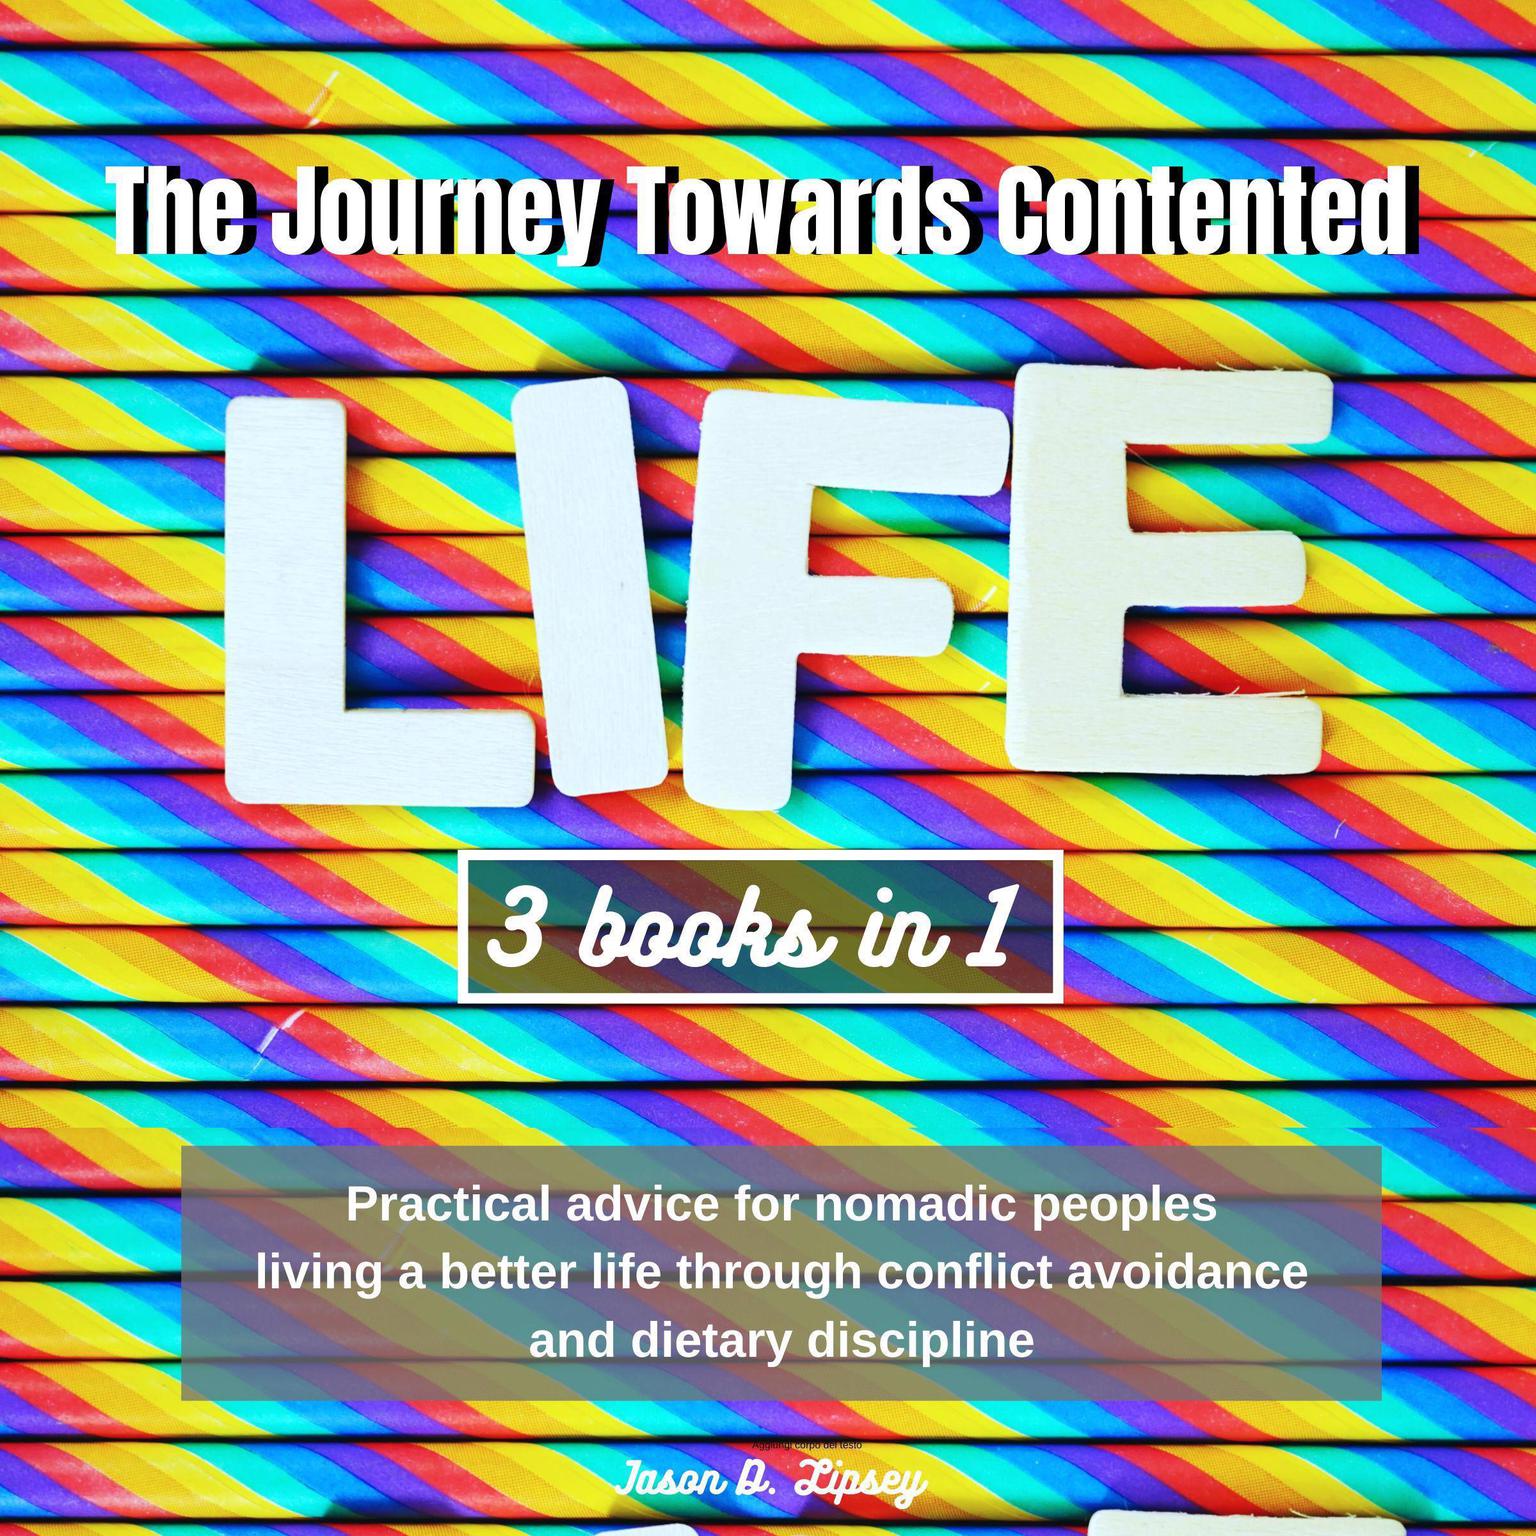 The Journey Towards  Contented Life : Practical advice for  nomadic peoples living a better life  through conflict avoidance and dietary discipline (Abridged) Audiobook, by Jason D. Lipsey